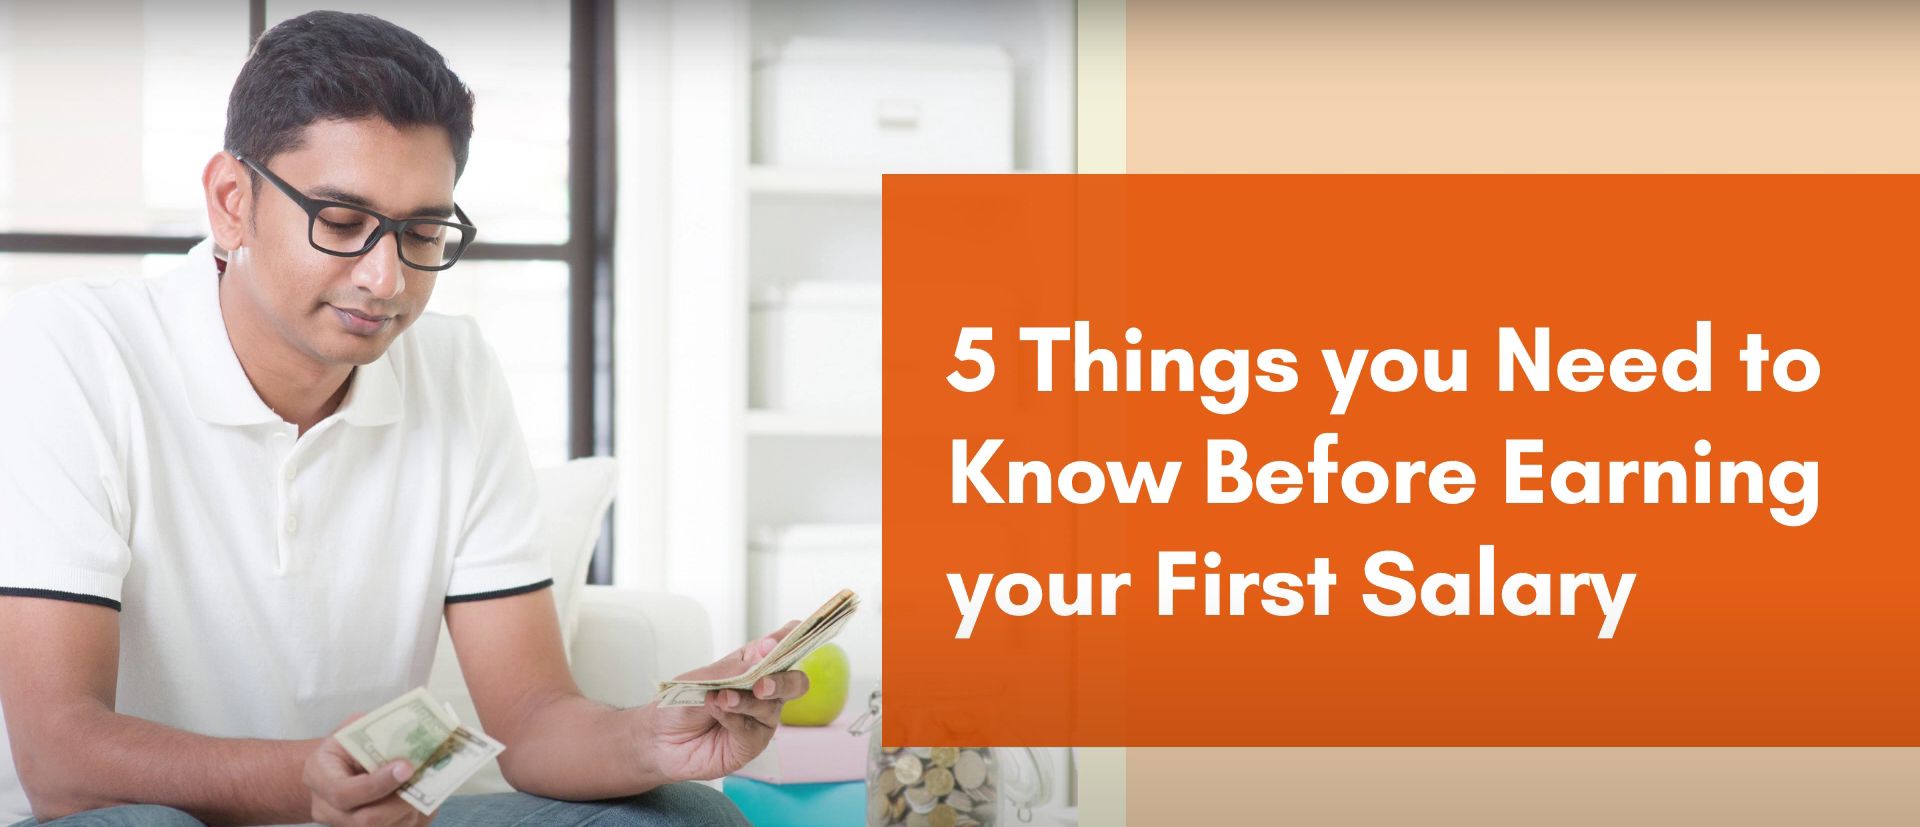 5 Things you Need to Know Before Earning your First Salary